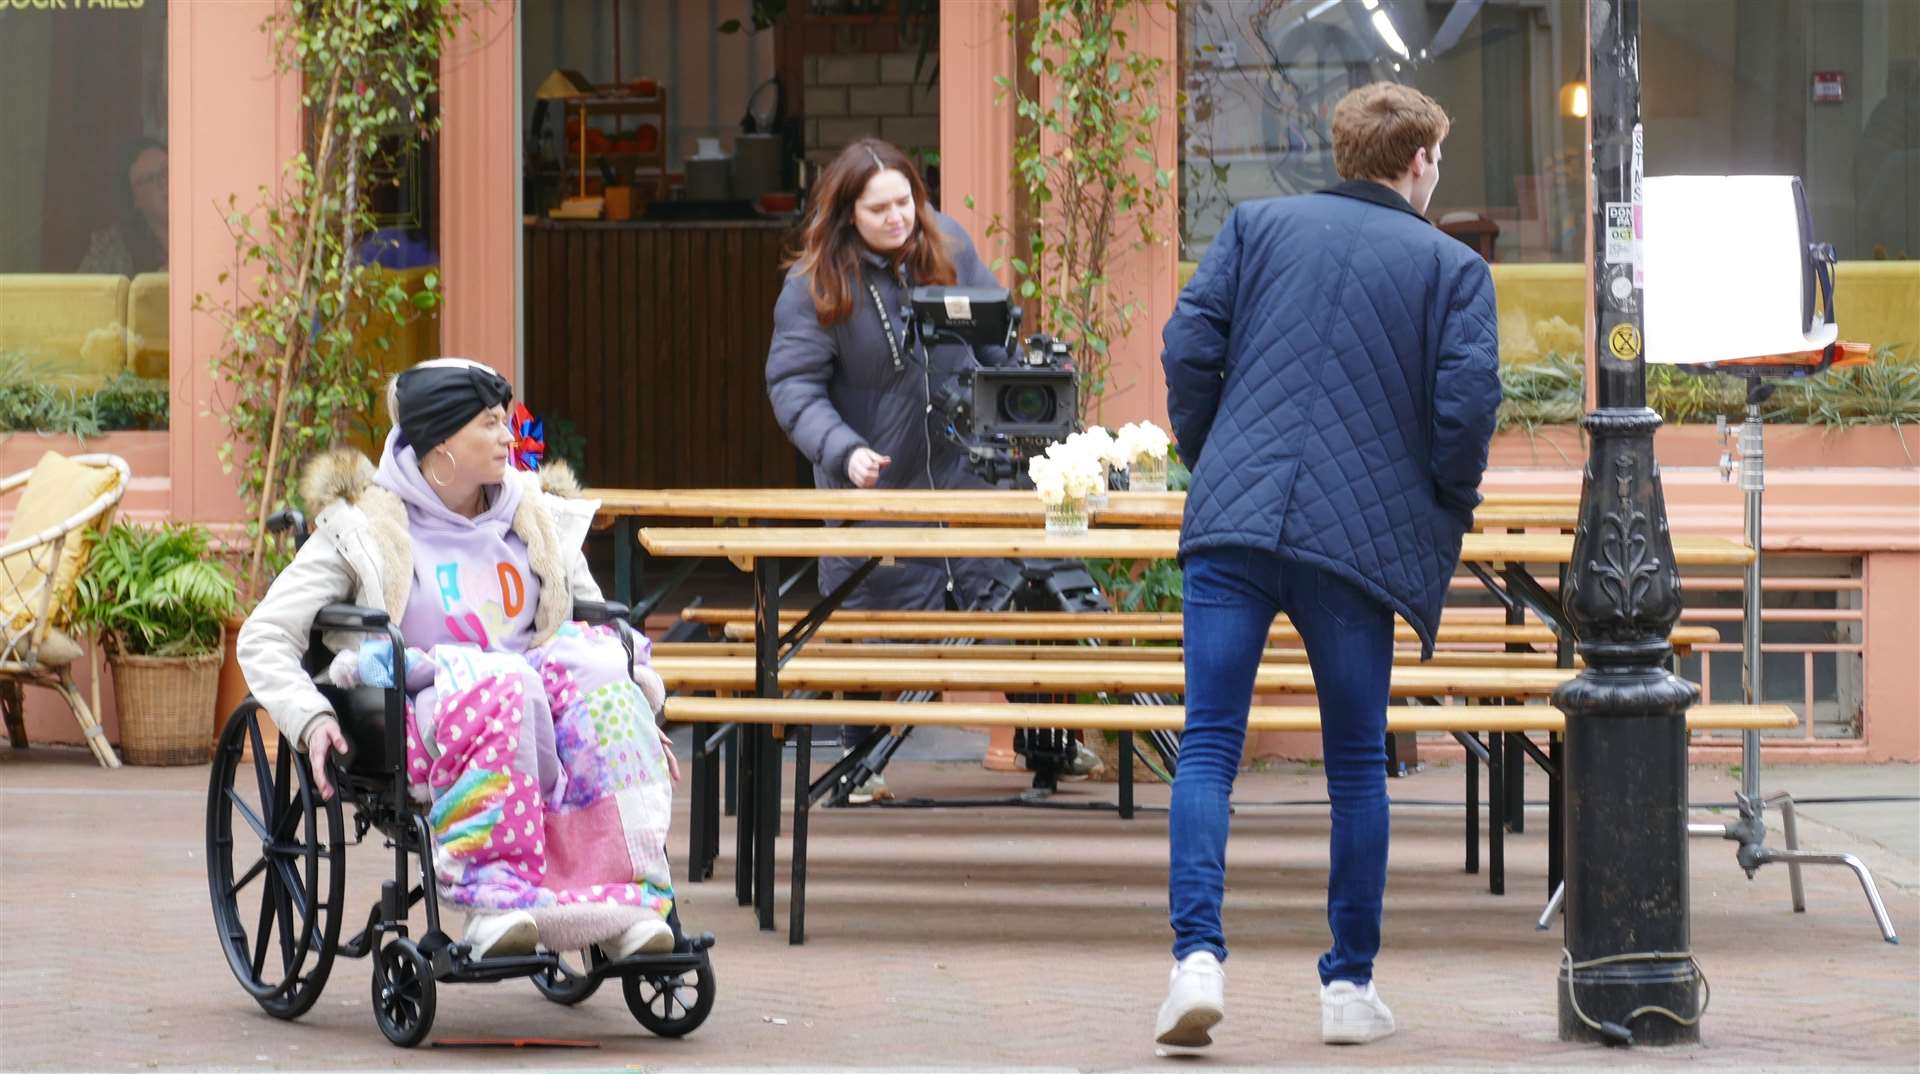 Eastenders actors were spotted filming in Margate. Picture: Frank Leppard